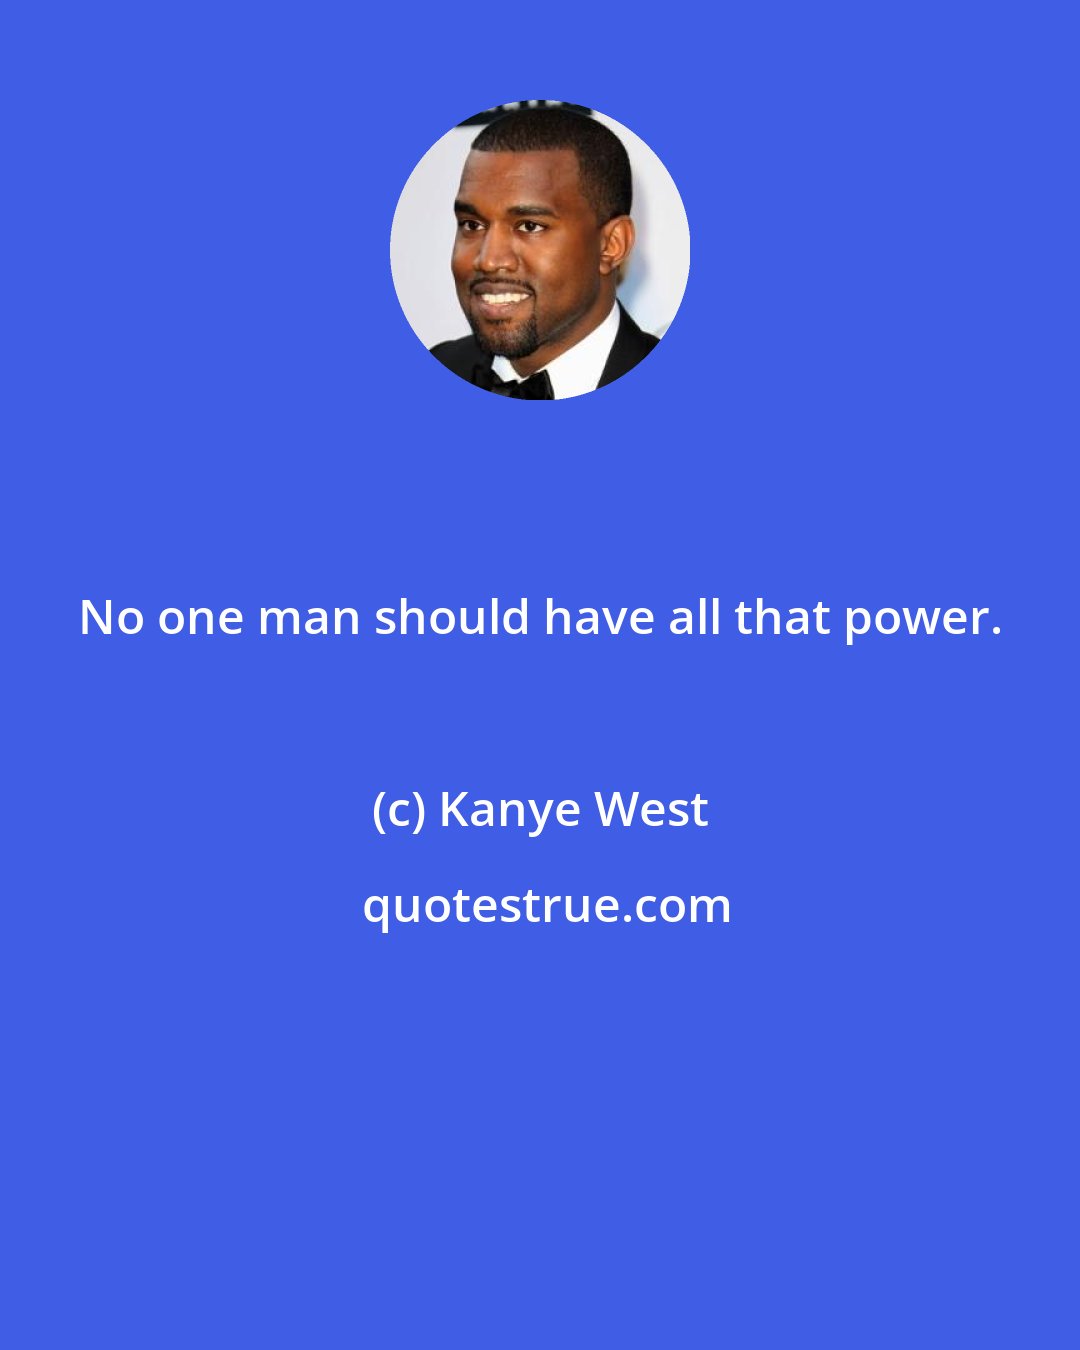 Kanye West: No one man should have all that power.